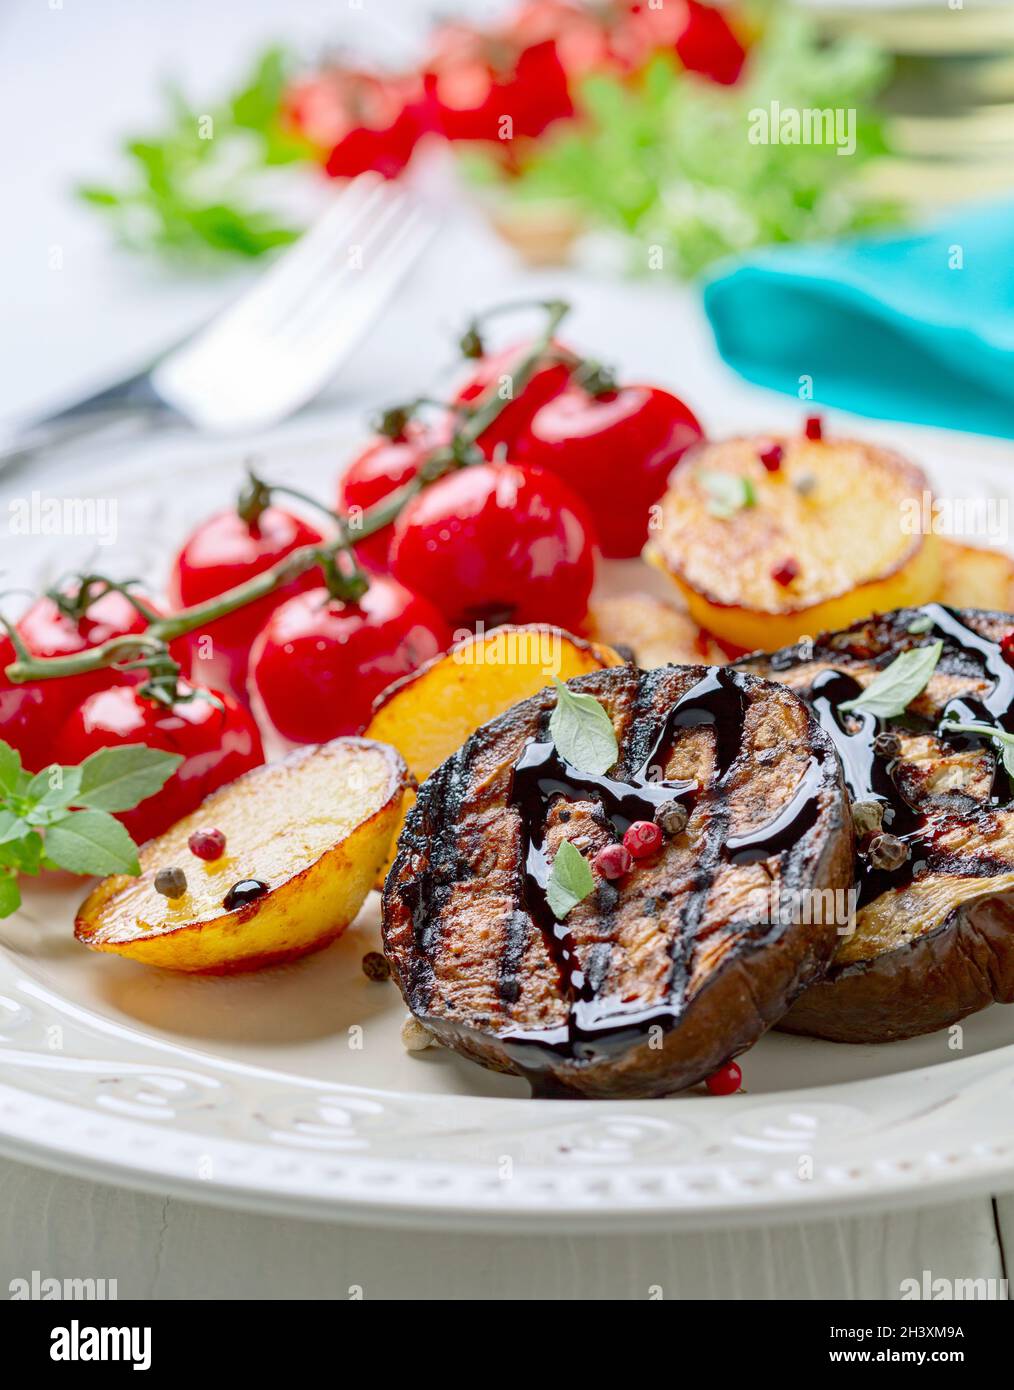 Eggplant steaks with vegetables. Stock Photo